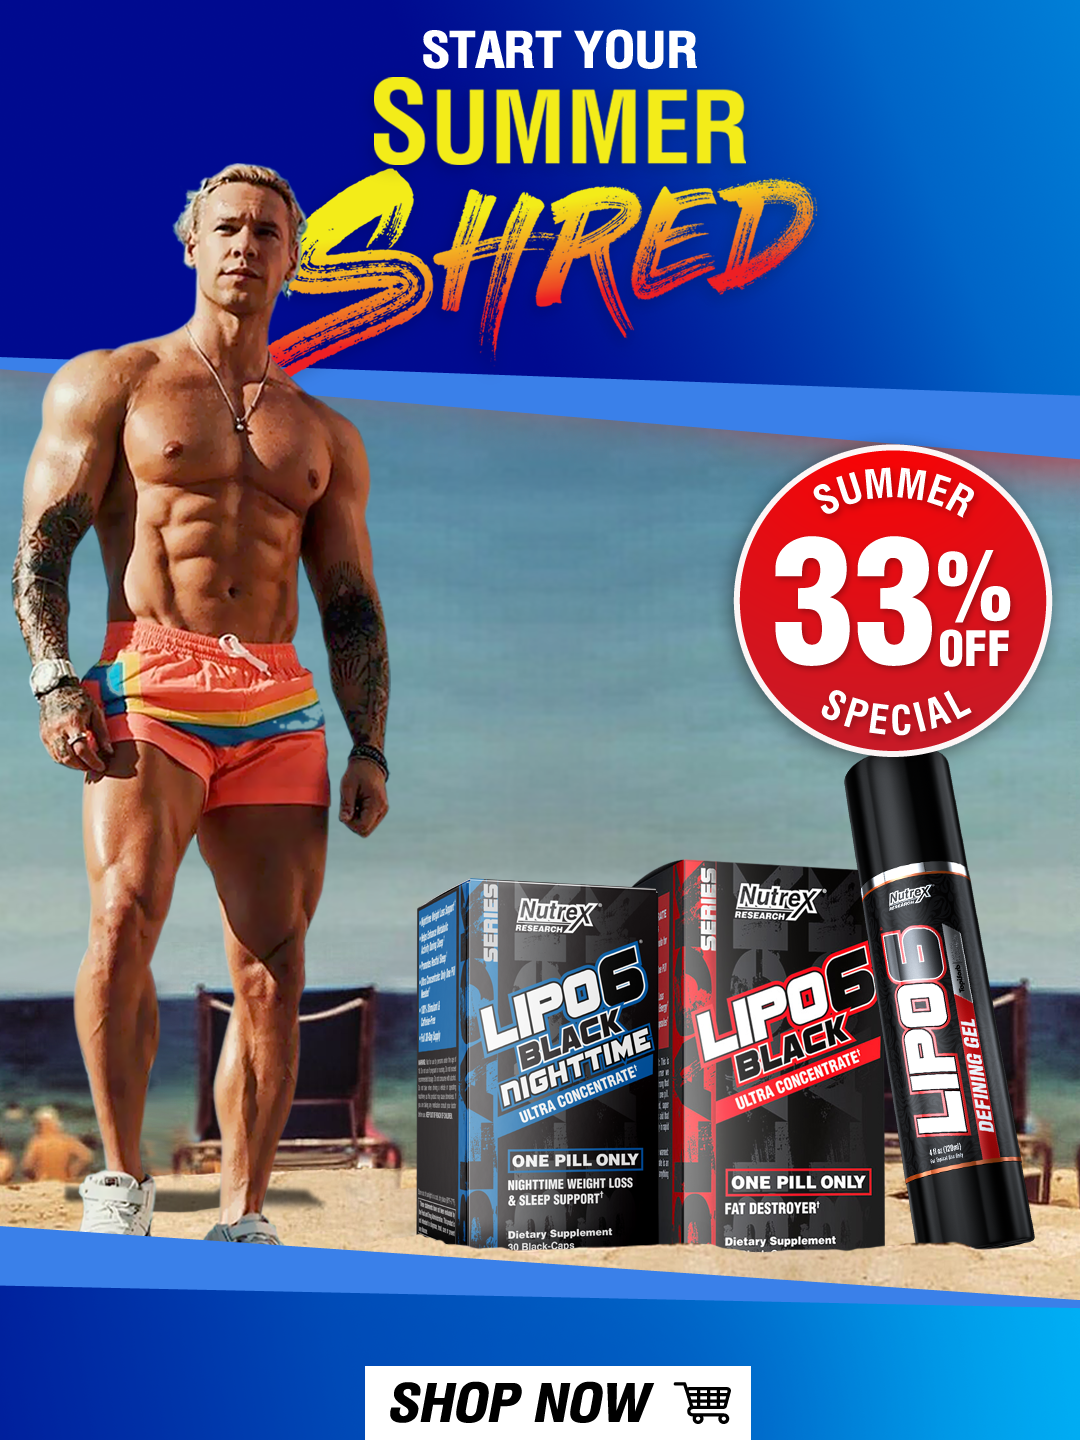 Total Fat Loss Stack Sale